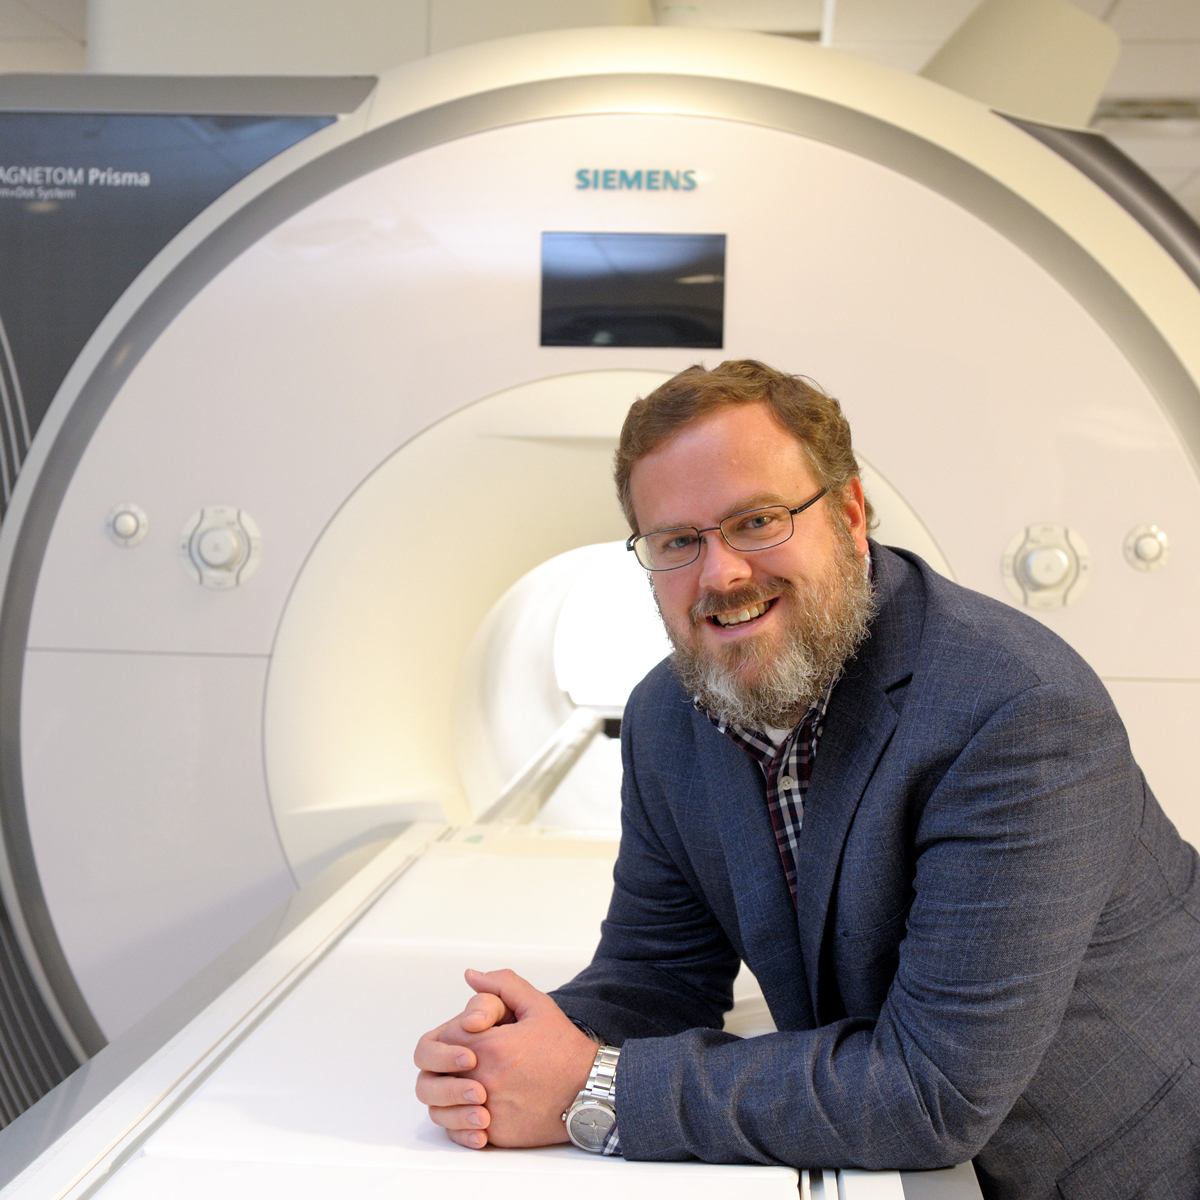 Professor Brad Sutton poses in front of an MRI scanner